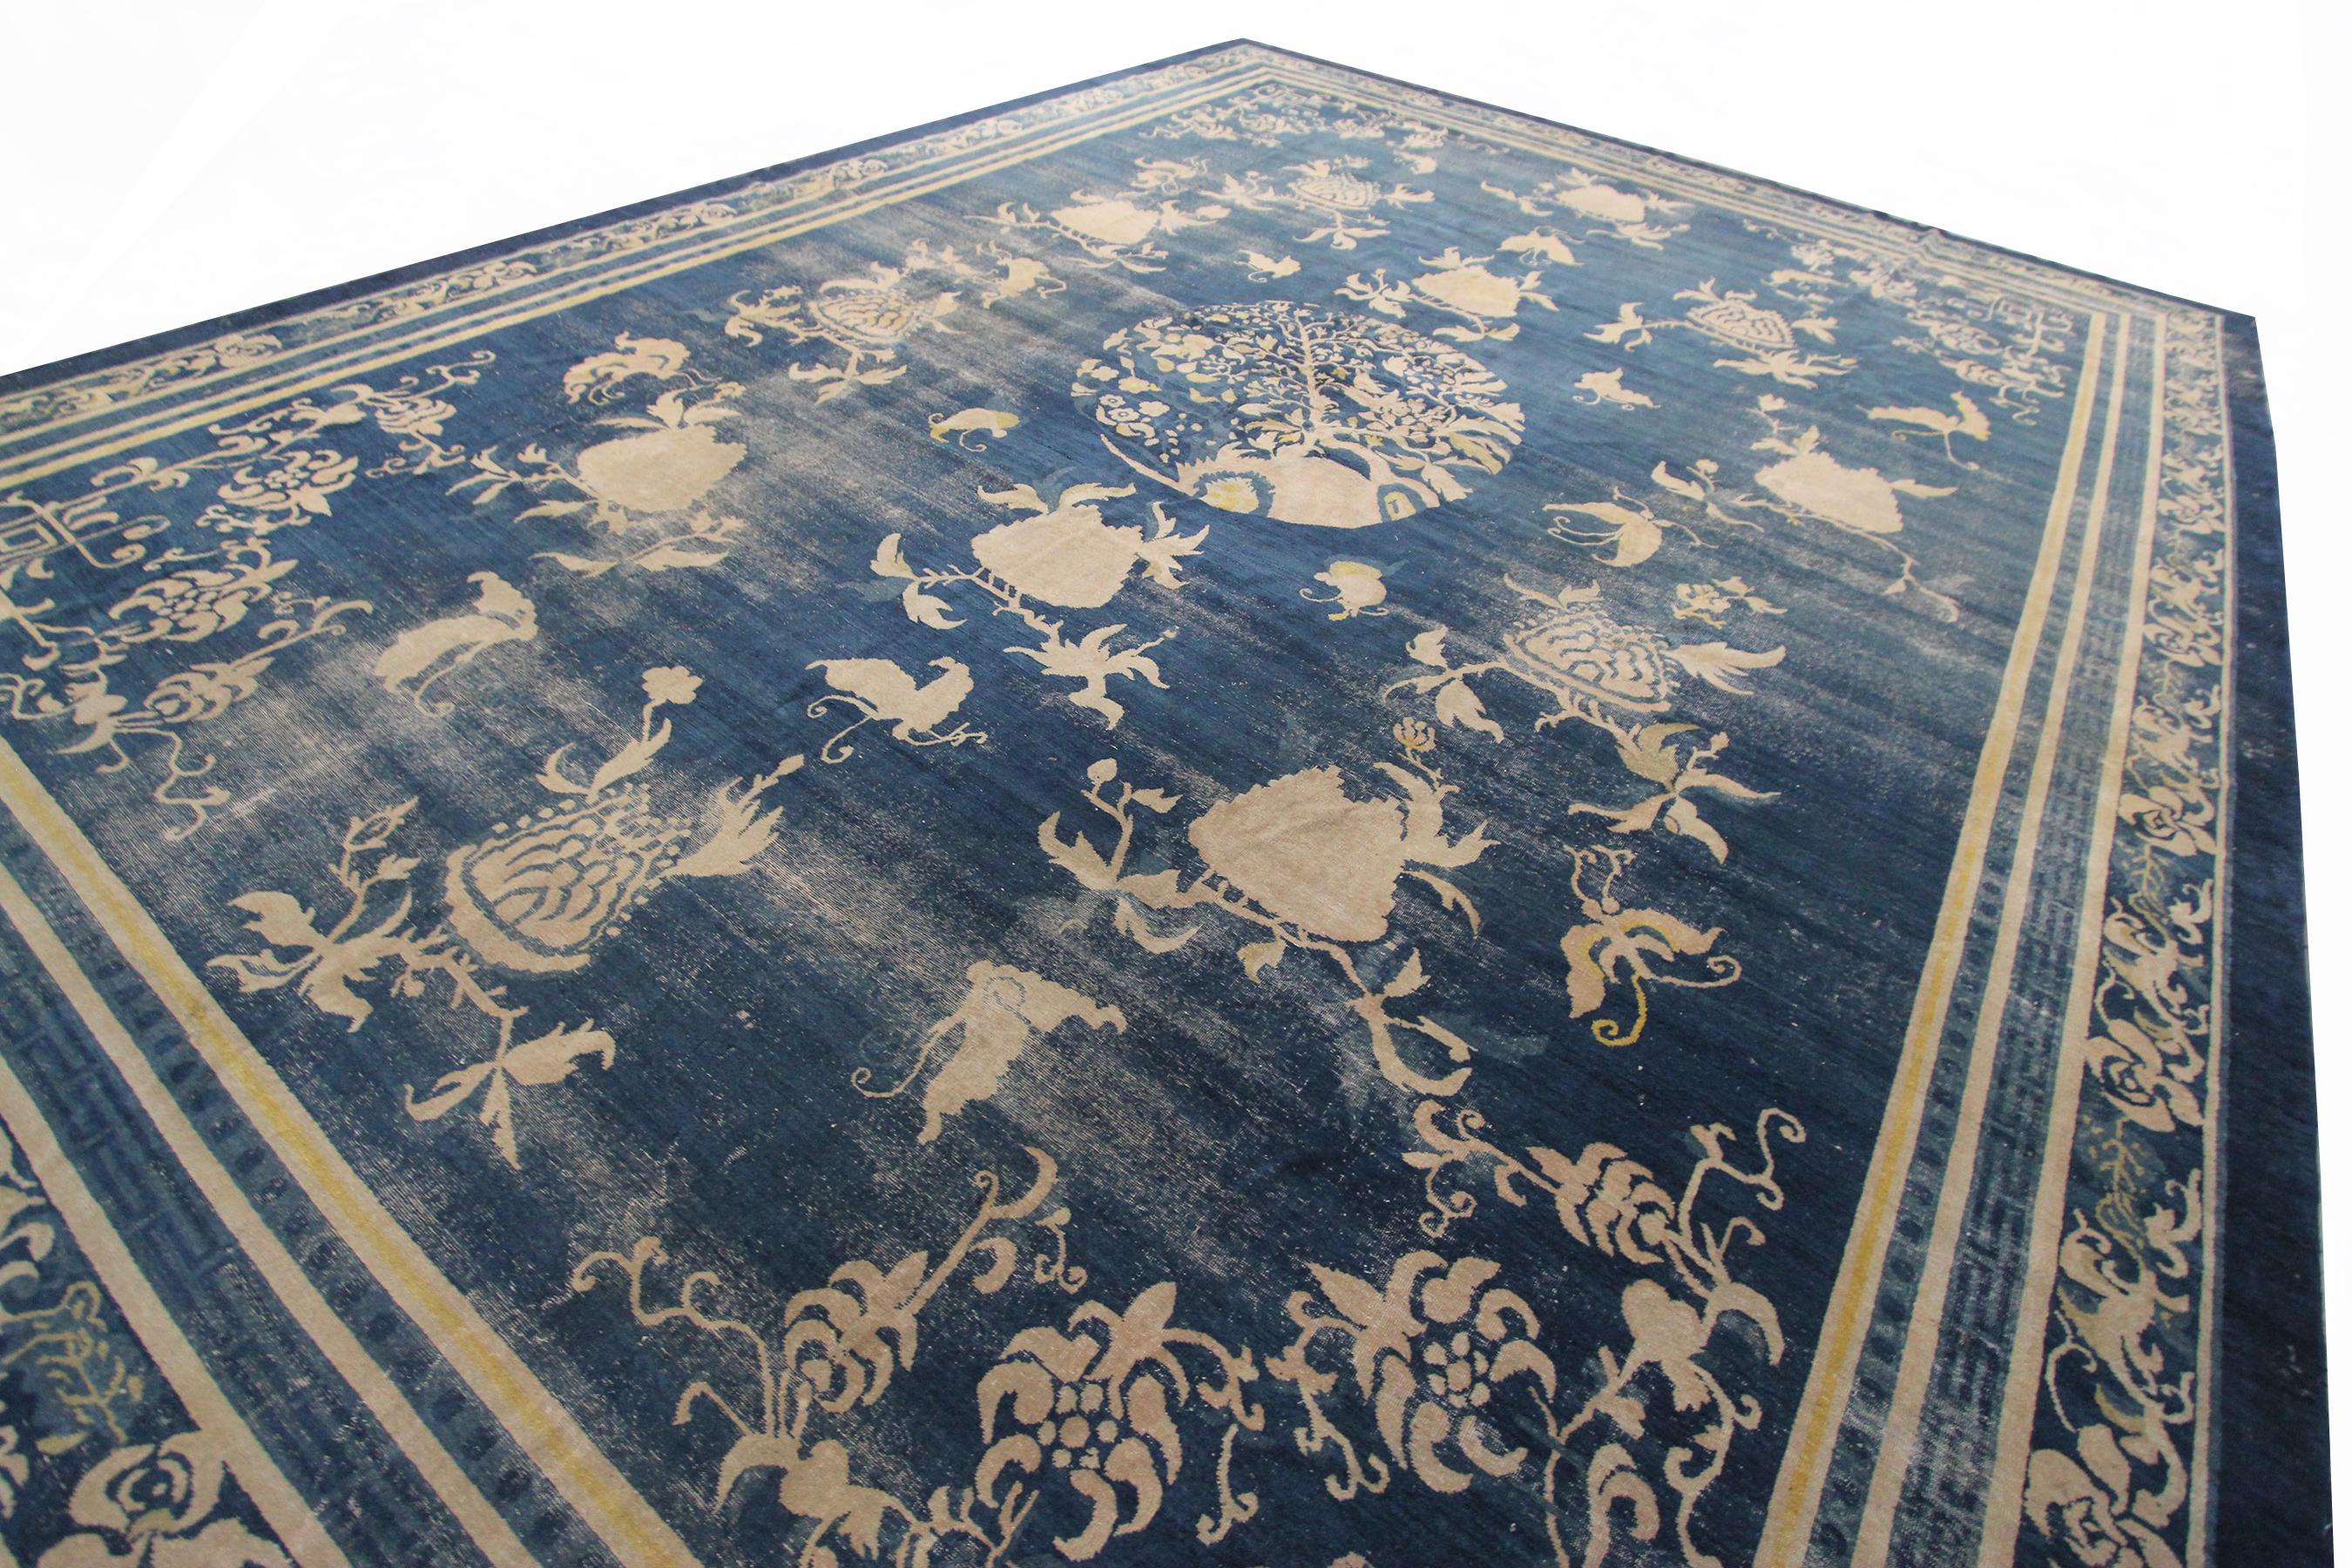 Hand-Knotted Mid-1800s Oversized Palace Chinese Rug Museum Quality Large Chinese Rug 13x18 For Sale